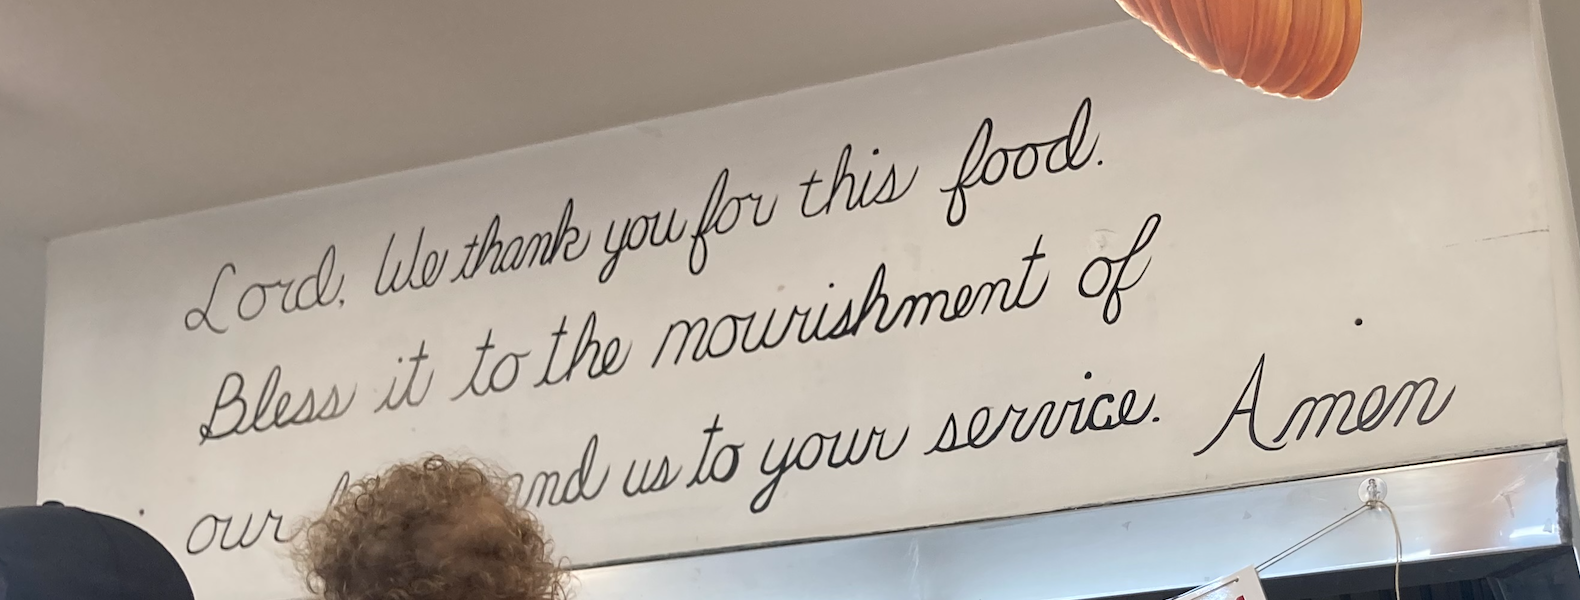 A display in a cafeteria that reads "Lord, we thank you for this food Bless it to the nourishment of our (blocked by head) us to your service. Amen."